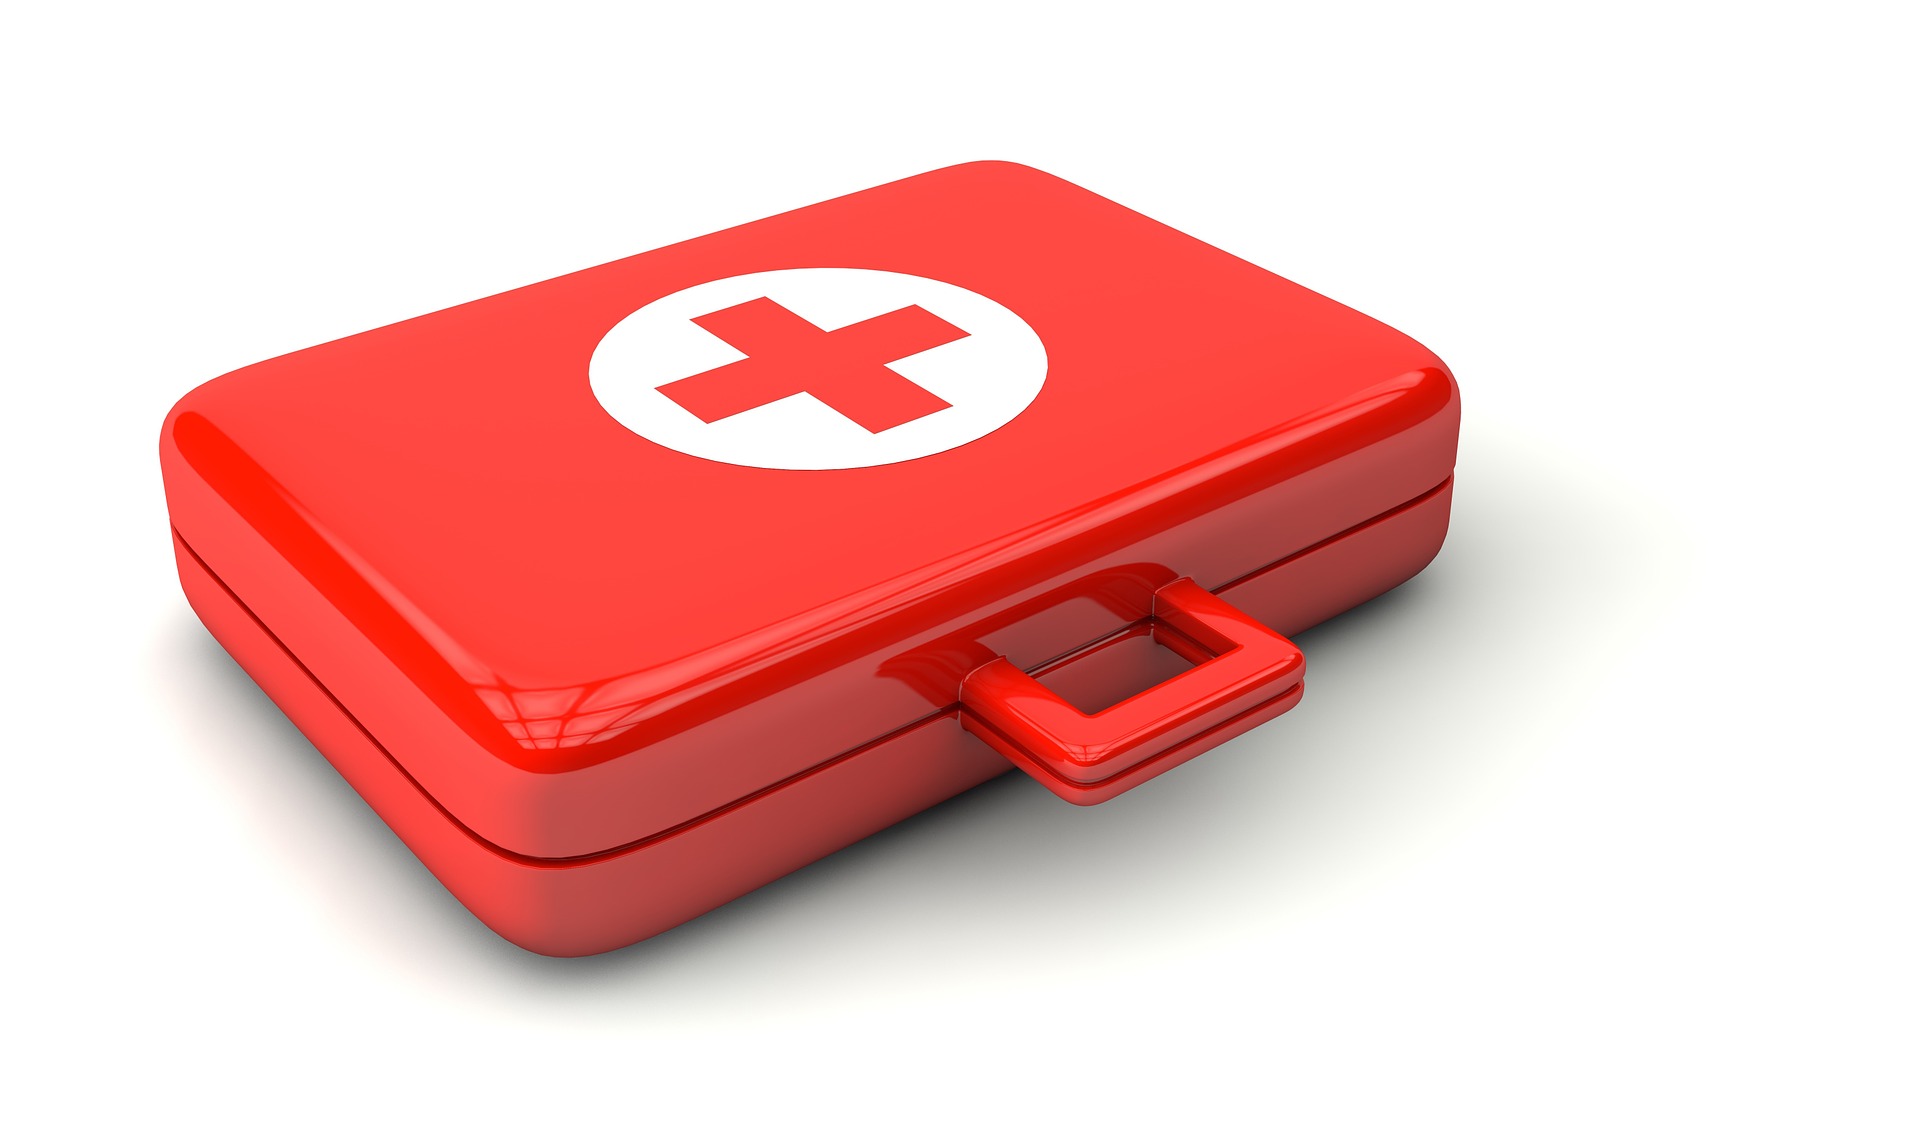 HOW TO PERFECTLY STOCK YOUR HOMEMADE FIRST AID KIT